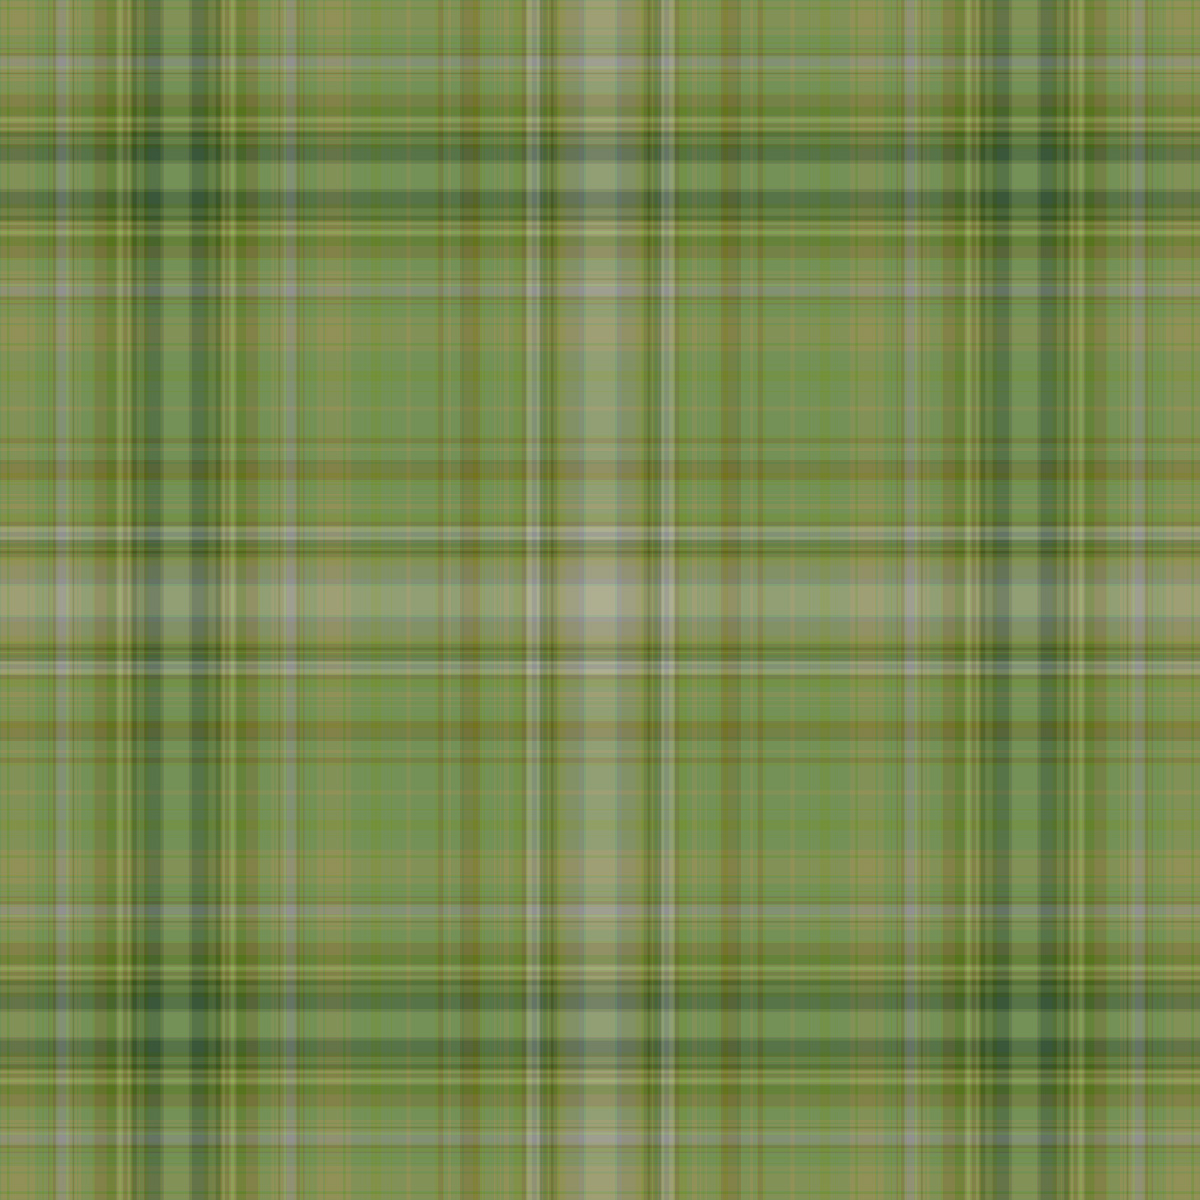 Green schotten muster background texture, free picture